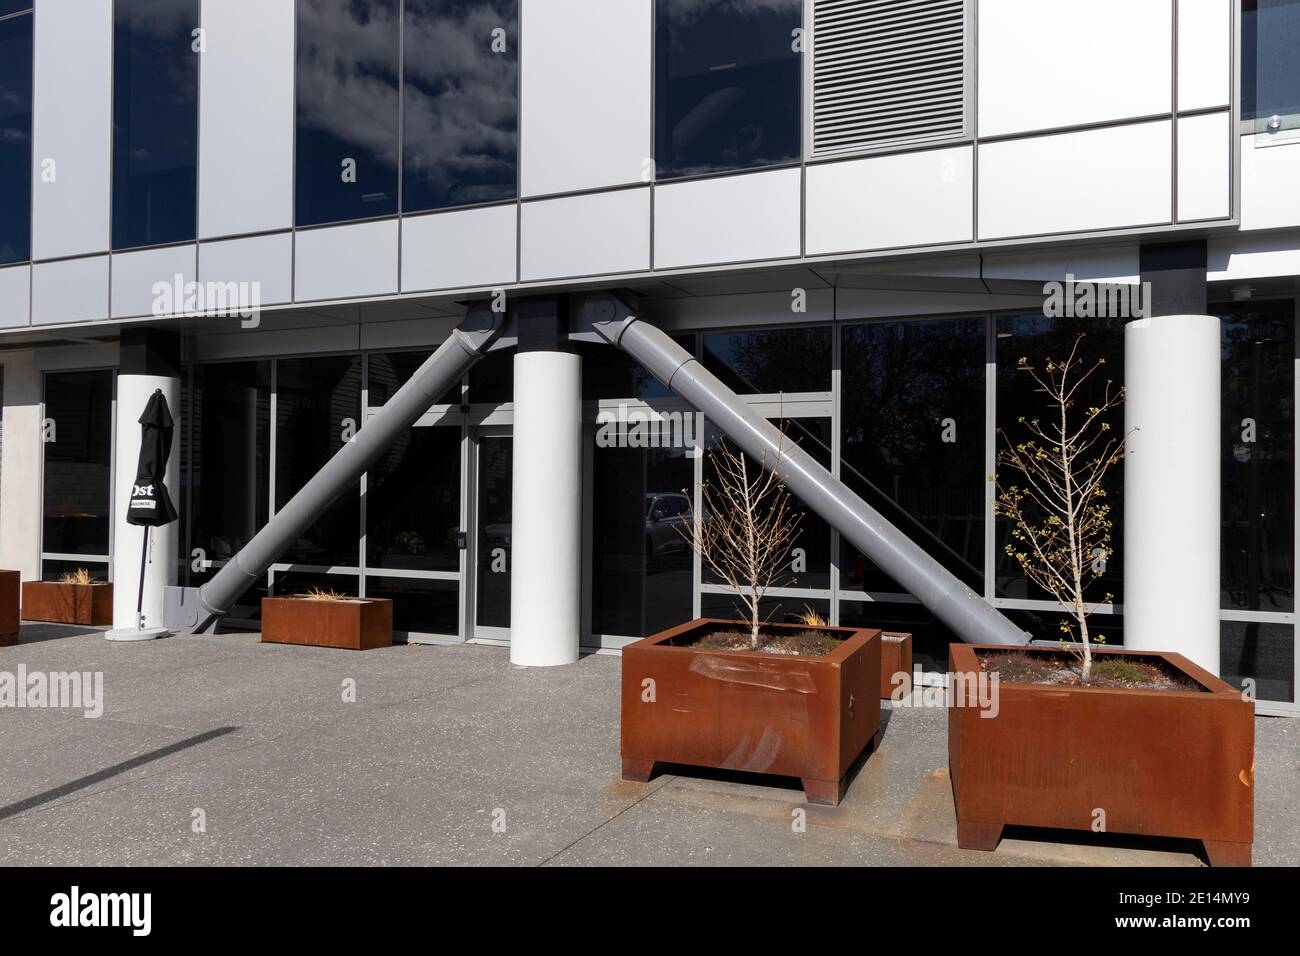 Example of silicon filled hydraulic ram suspension struts used on buildings with earthquake zones. Implemented at each floor level. Christchurch, NZ. Stock Photo